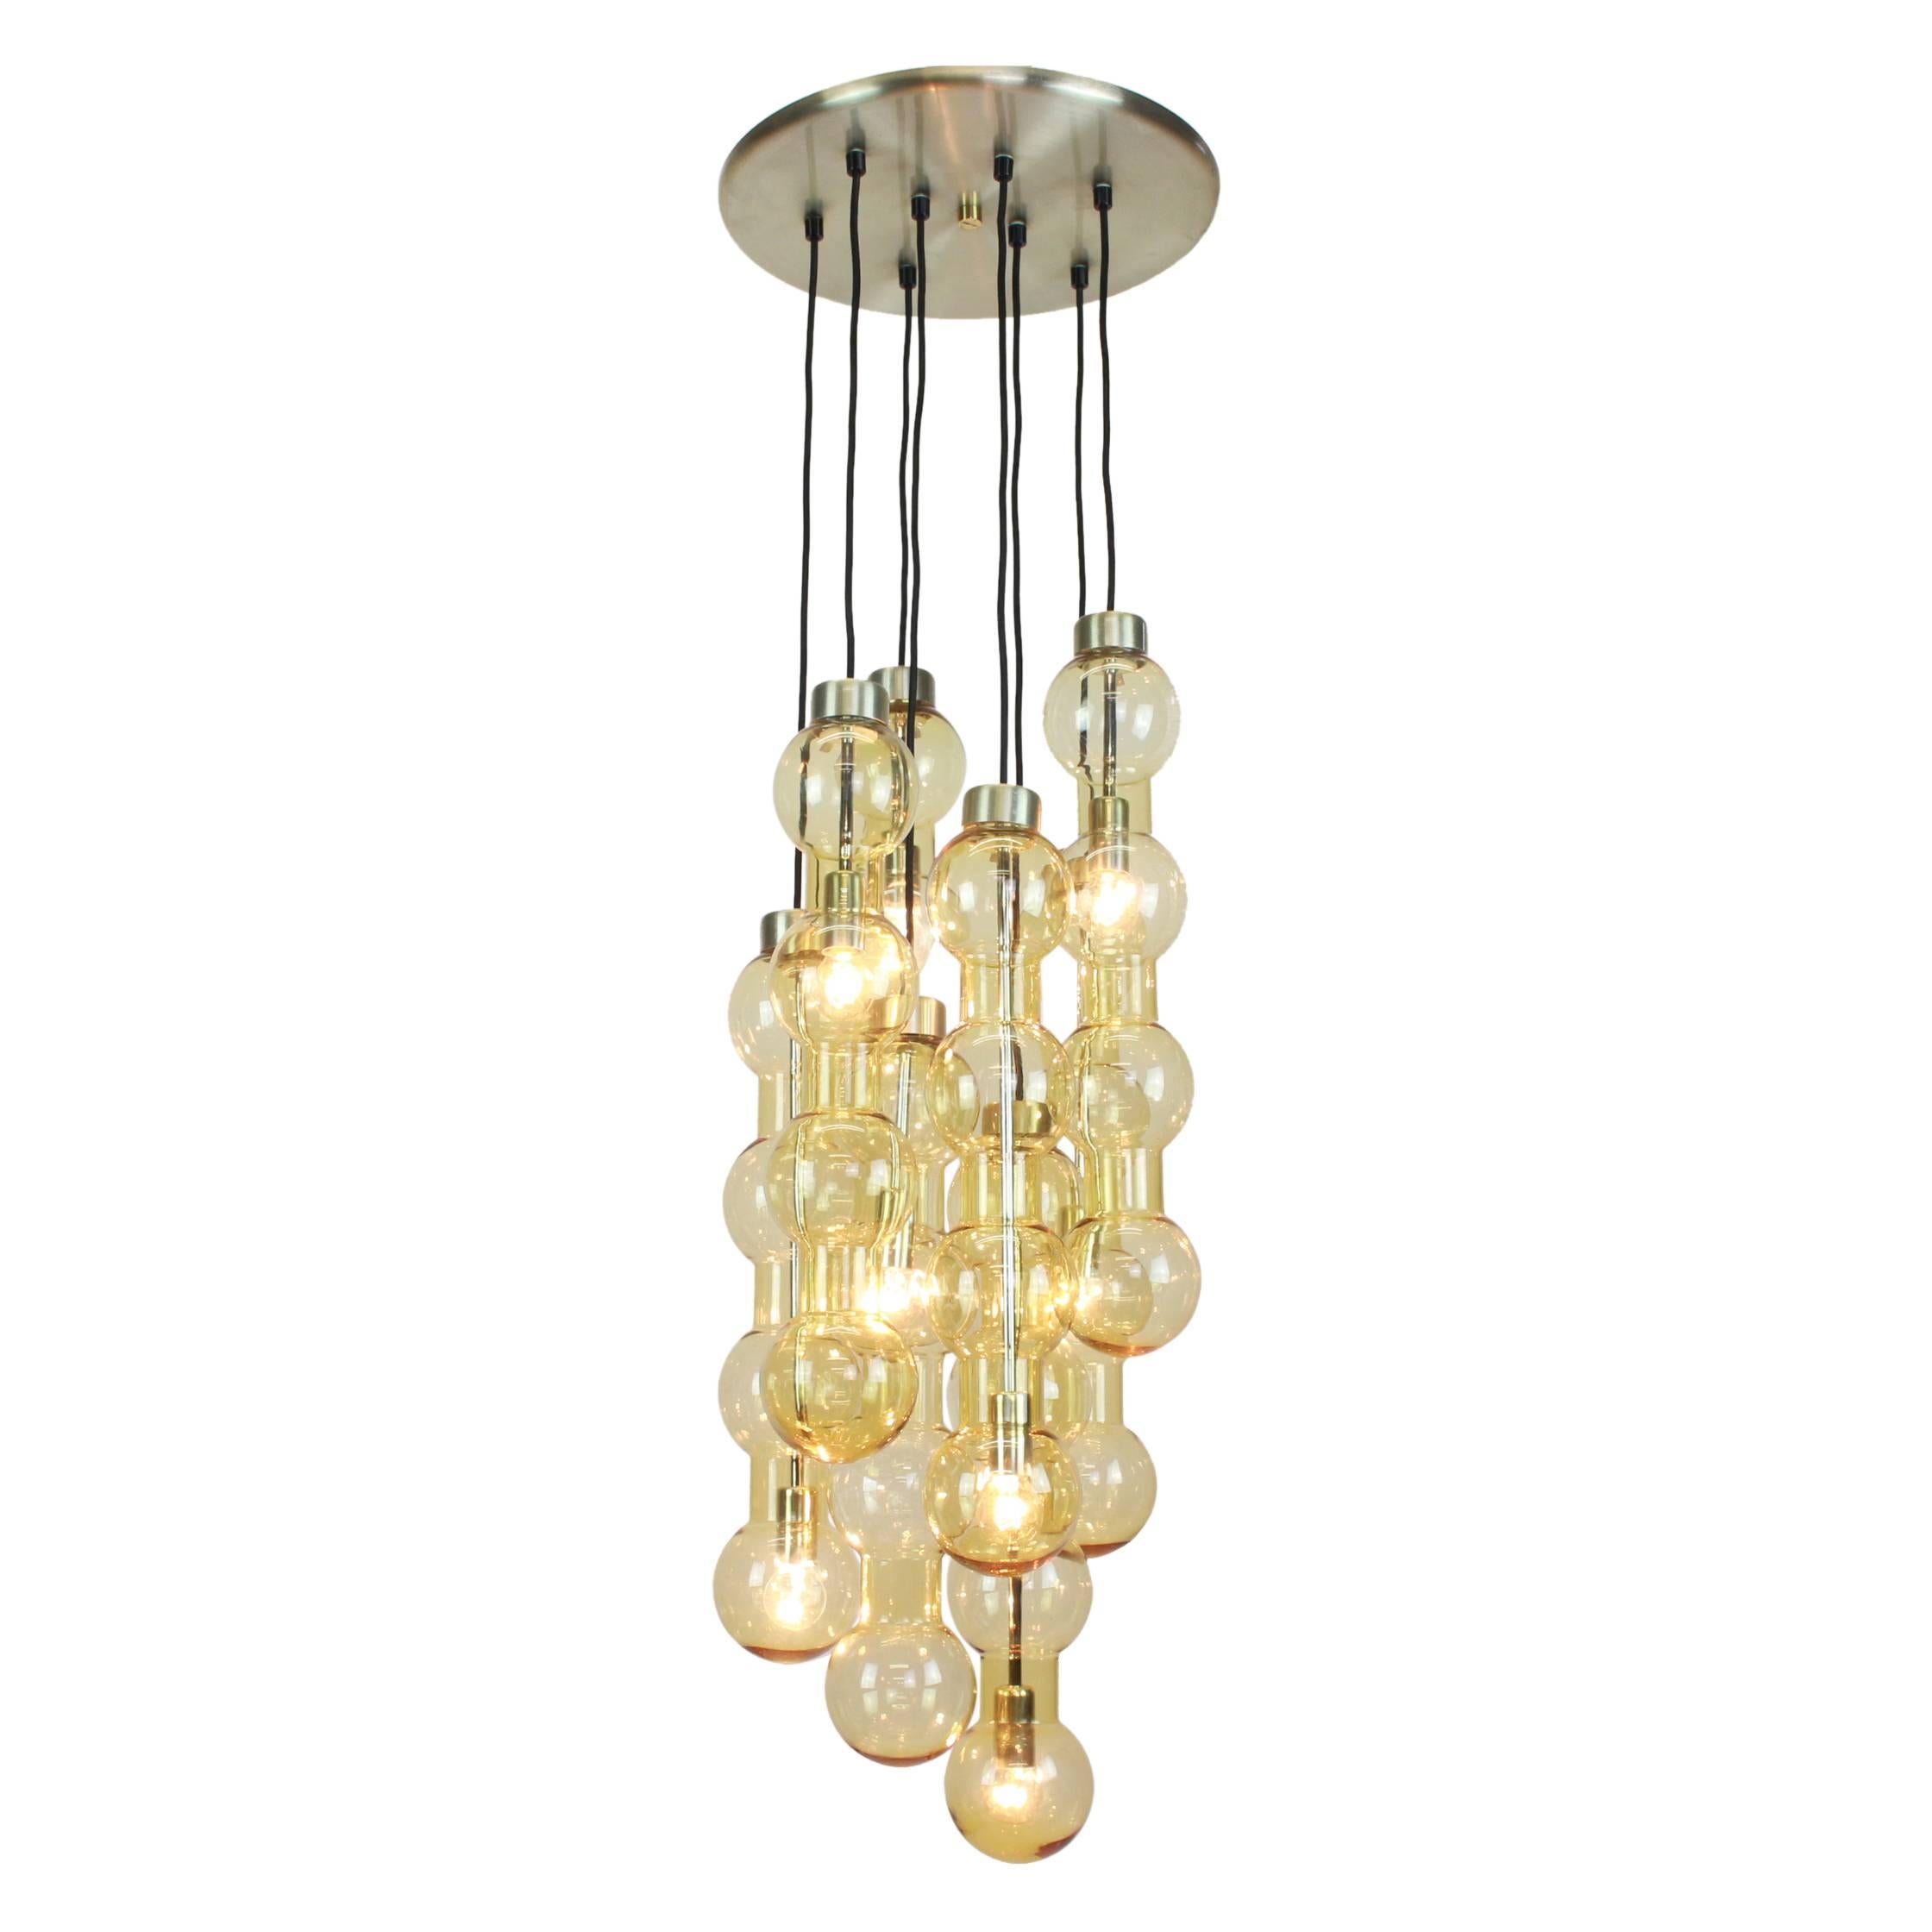 Large Rare Glass Hanging Fixture by Doria, Germany, 1970s